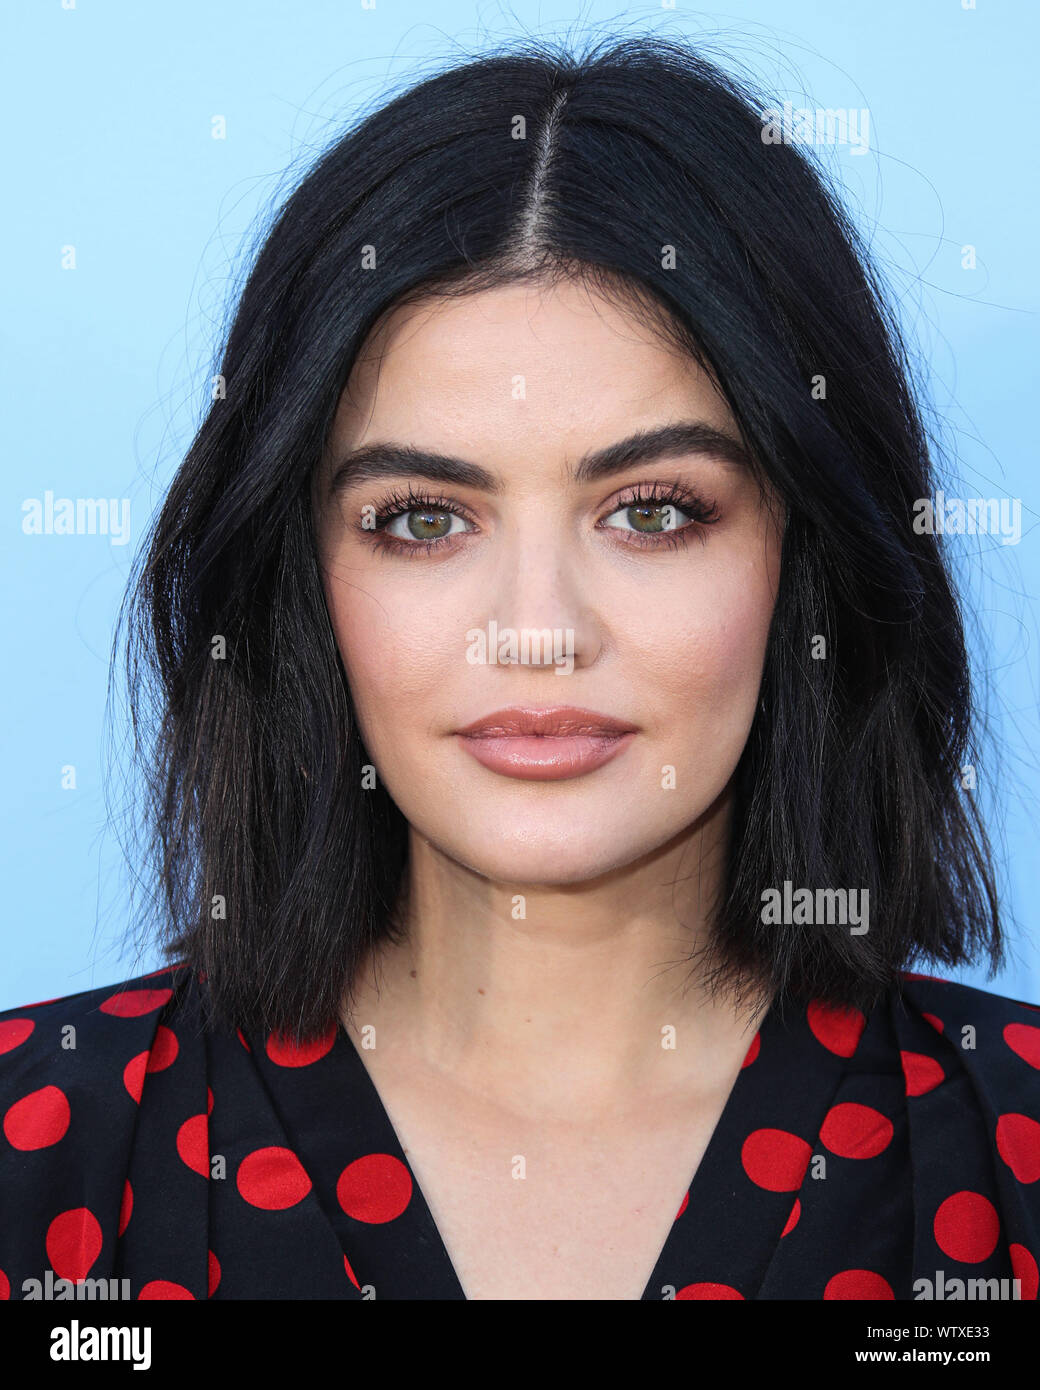 New York City, United States. 11th Sep, 2019. BROOKLYN, NEW YORK CITY, NEW YORK, USA - SEPTEMBER 11: Lucy Hale arrives at the Michael Kors Collection Spring 2020 Runway Show during New York Fashion Week: The Shows held at Duggal Greenhouse on September 11, 2019 in Brooklyn, New York City, New York, United States. (Photo by Xavier Collin/Image Press Agency) Credit: Image Press Agency/Alamy Live News Stock Photo